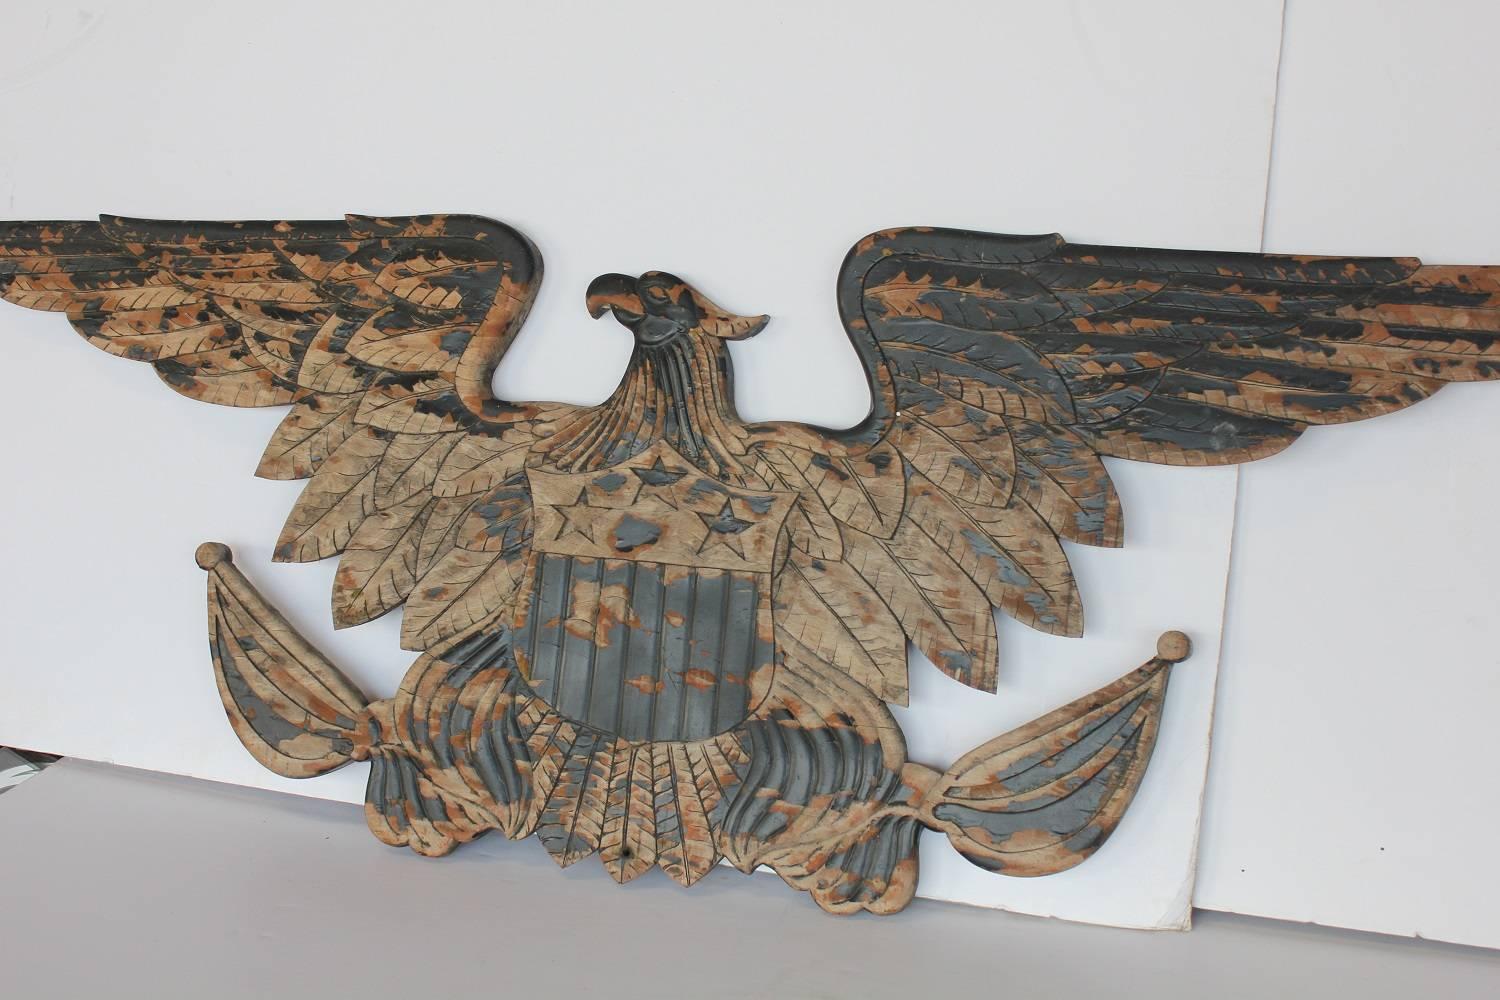 Late 19th century American hand-carved wood eagle.